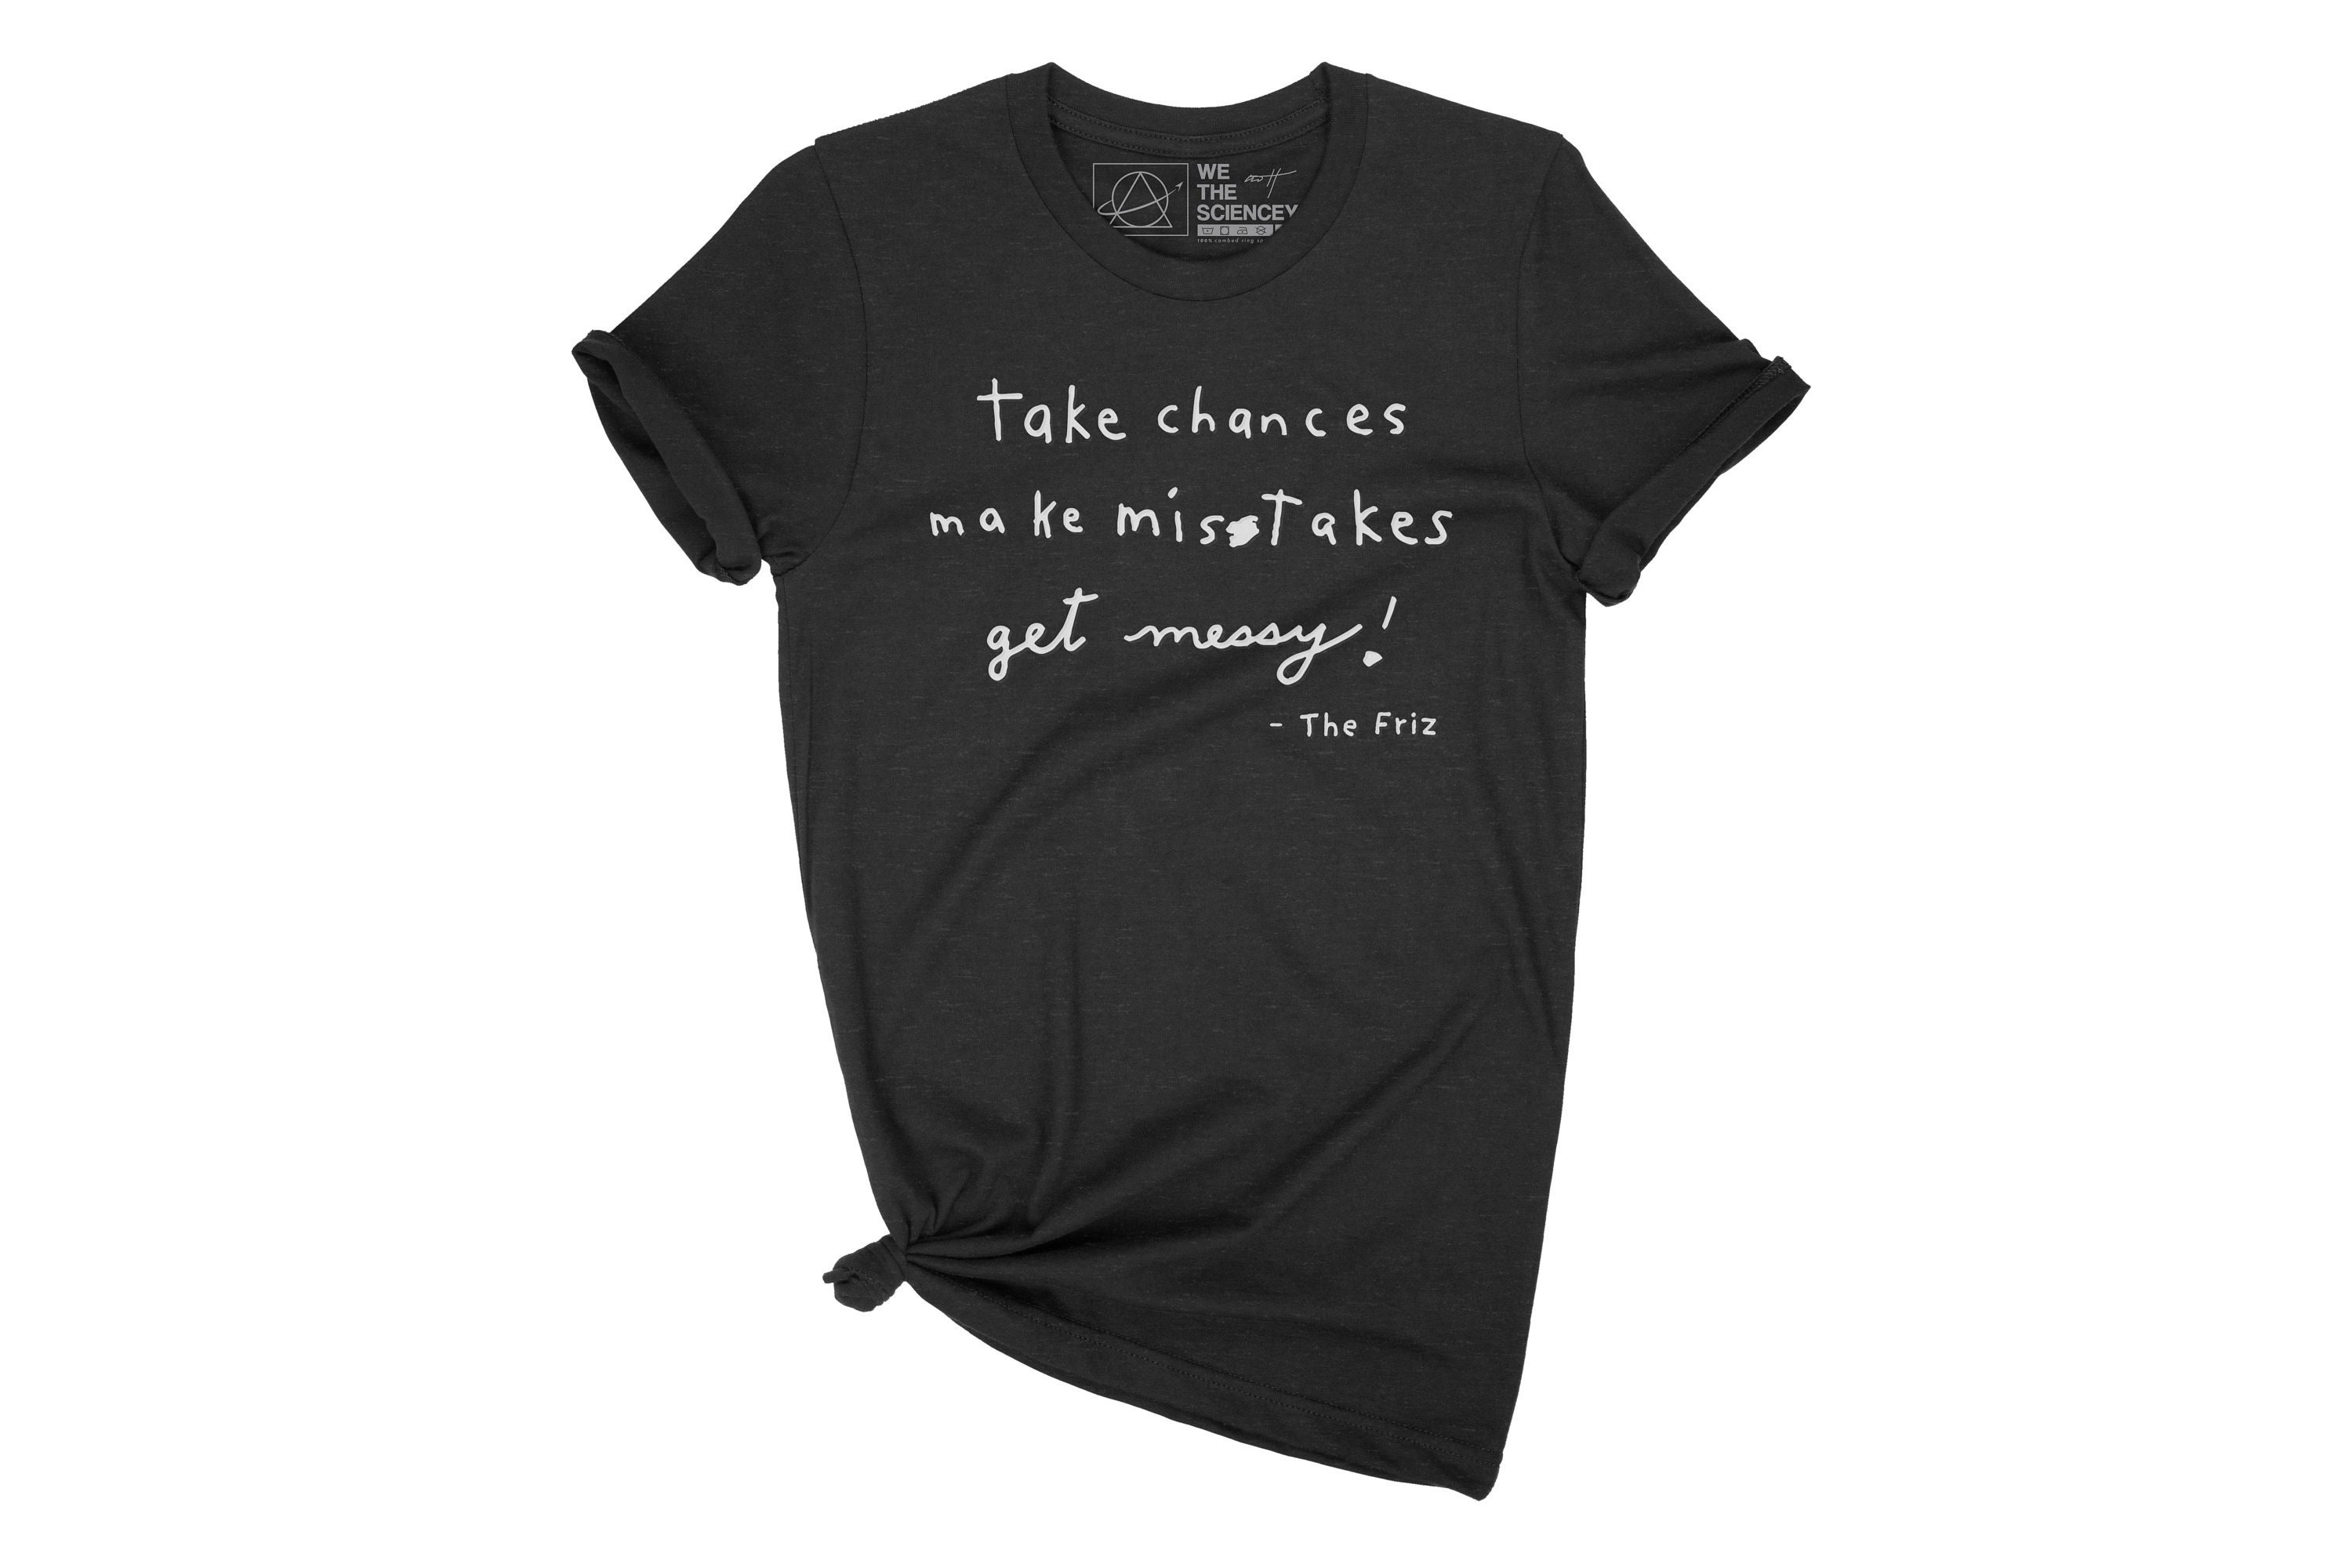 Teacher Life 2021 Magic School Bus Tee Miss Frizzle Quote Take Chances Make Mistakes Get Messy Shirt Ms Frizzle Shirt